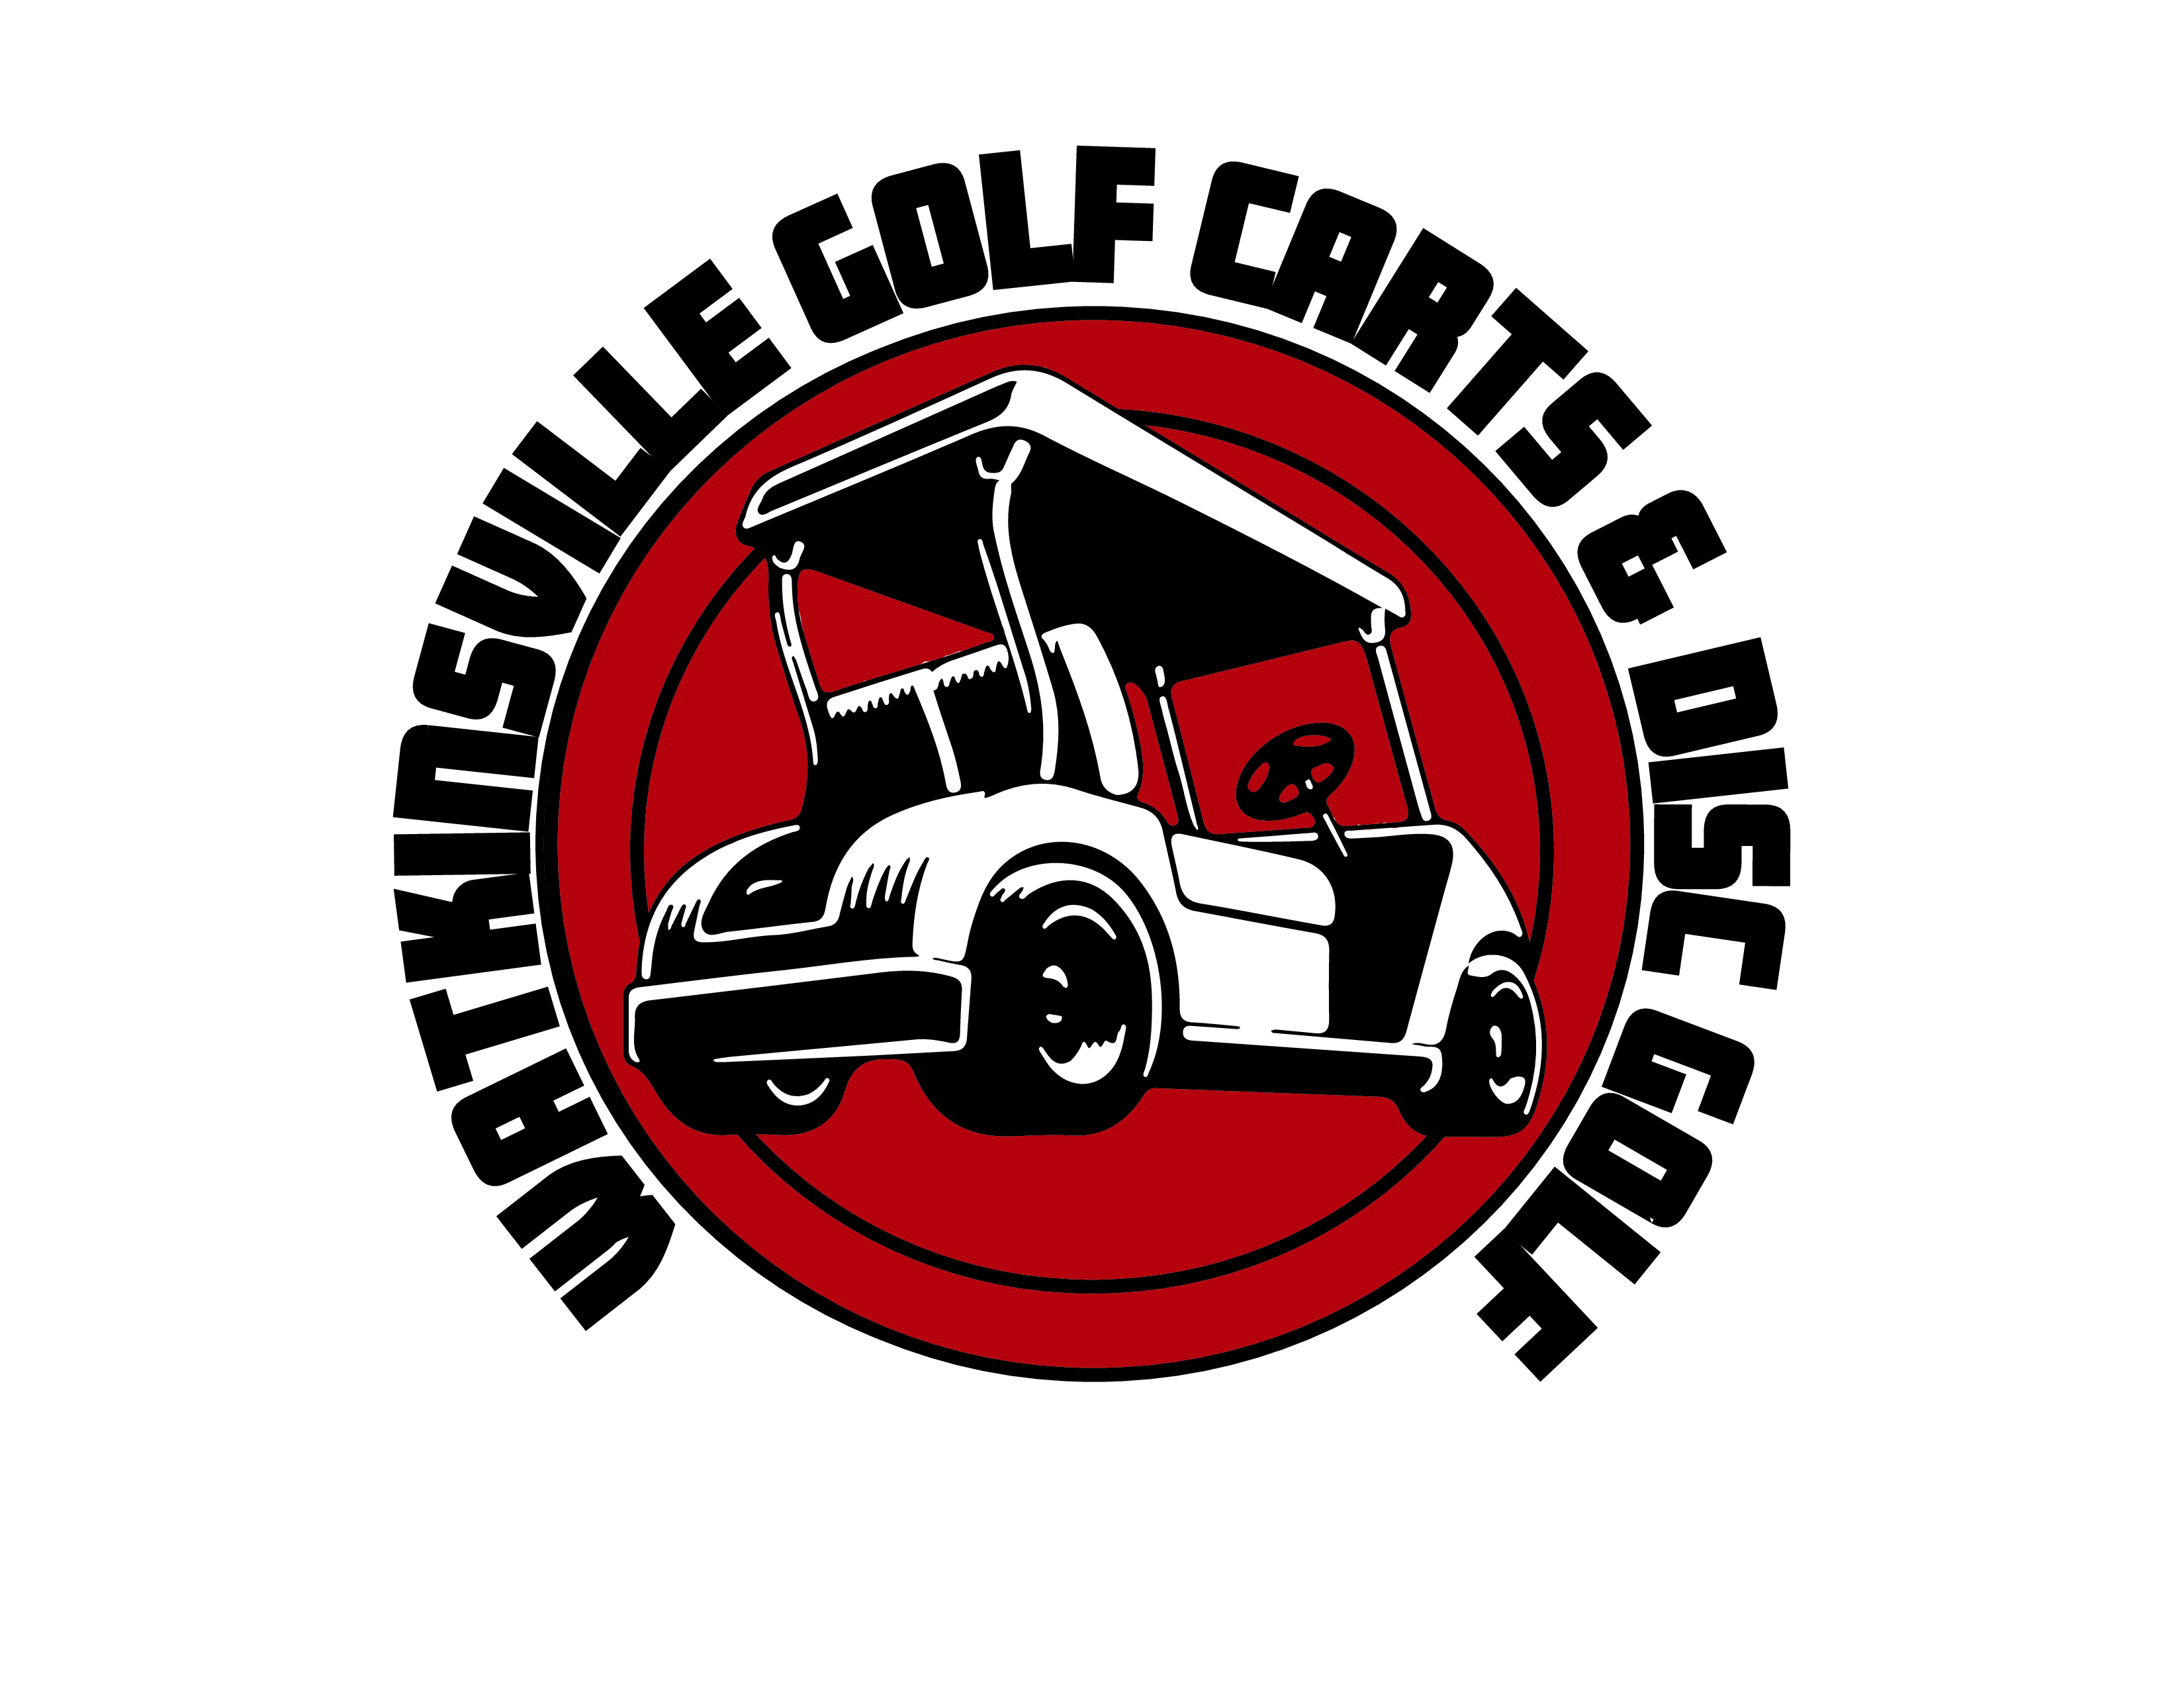 A red and white logo of a golf cart.